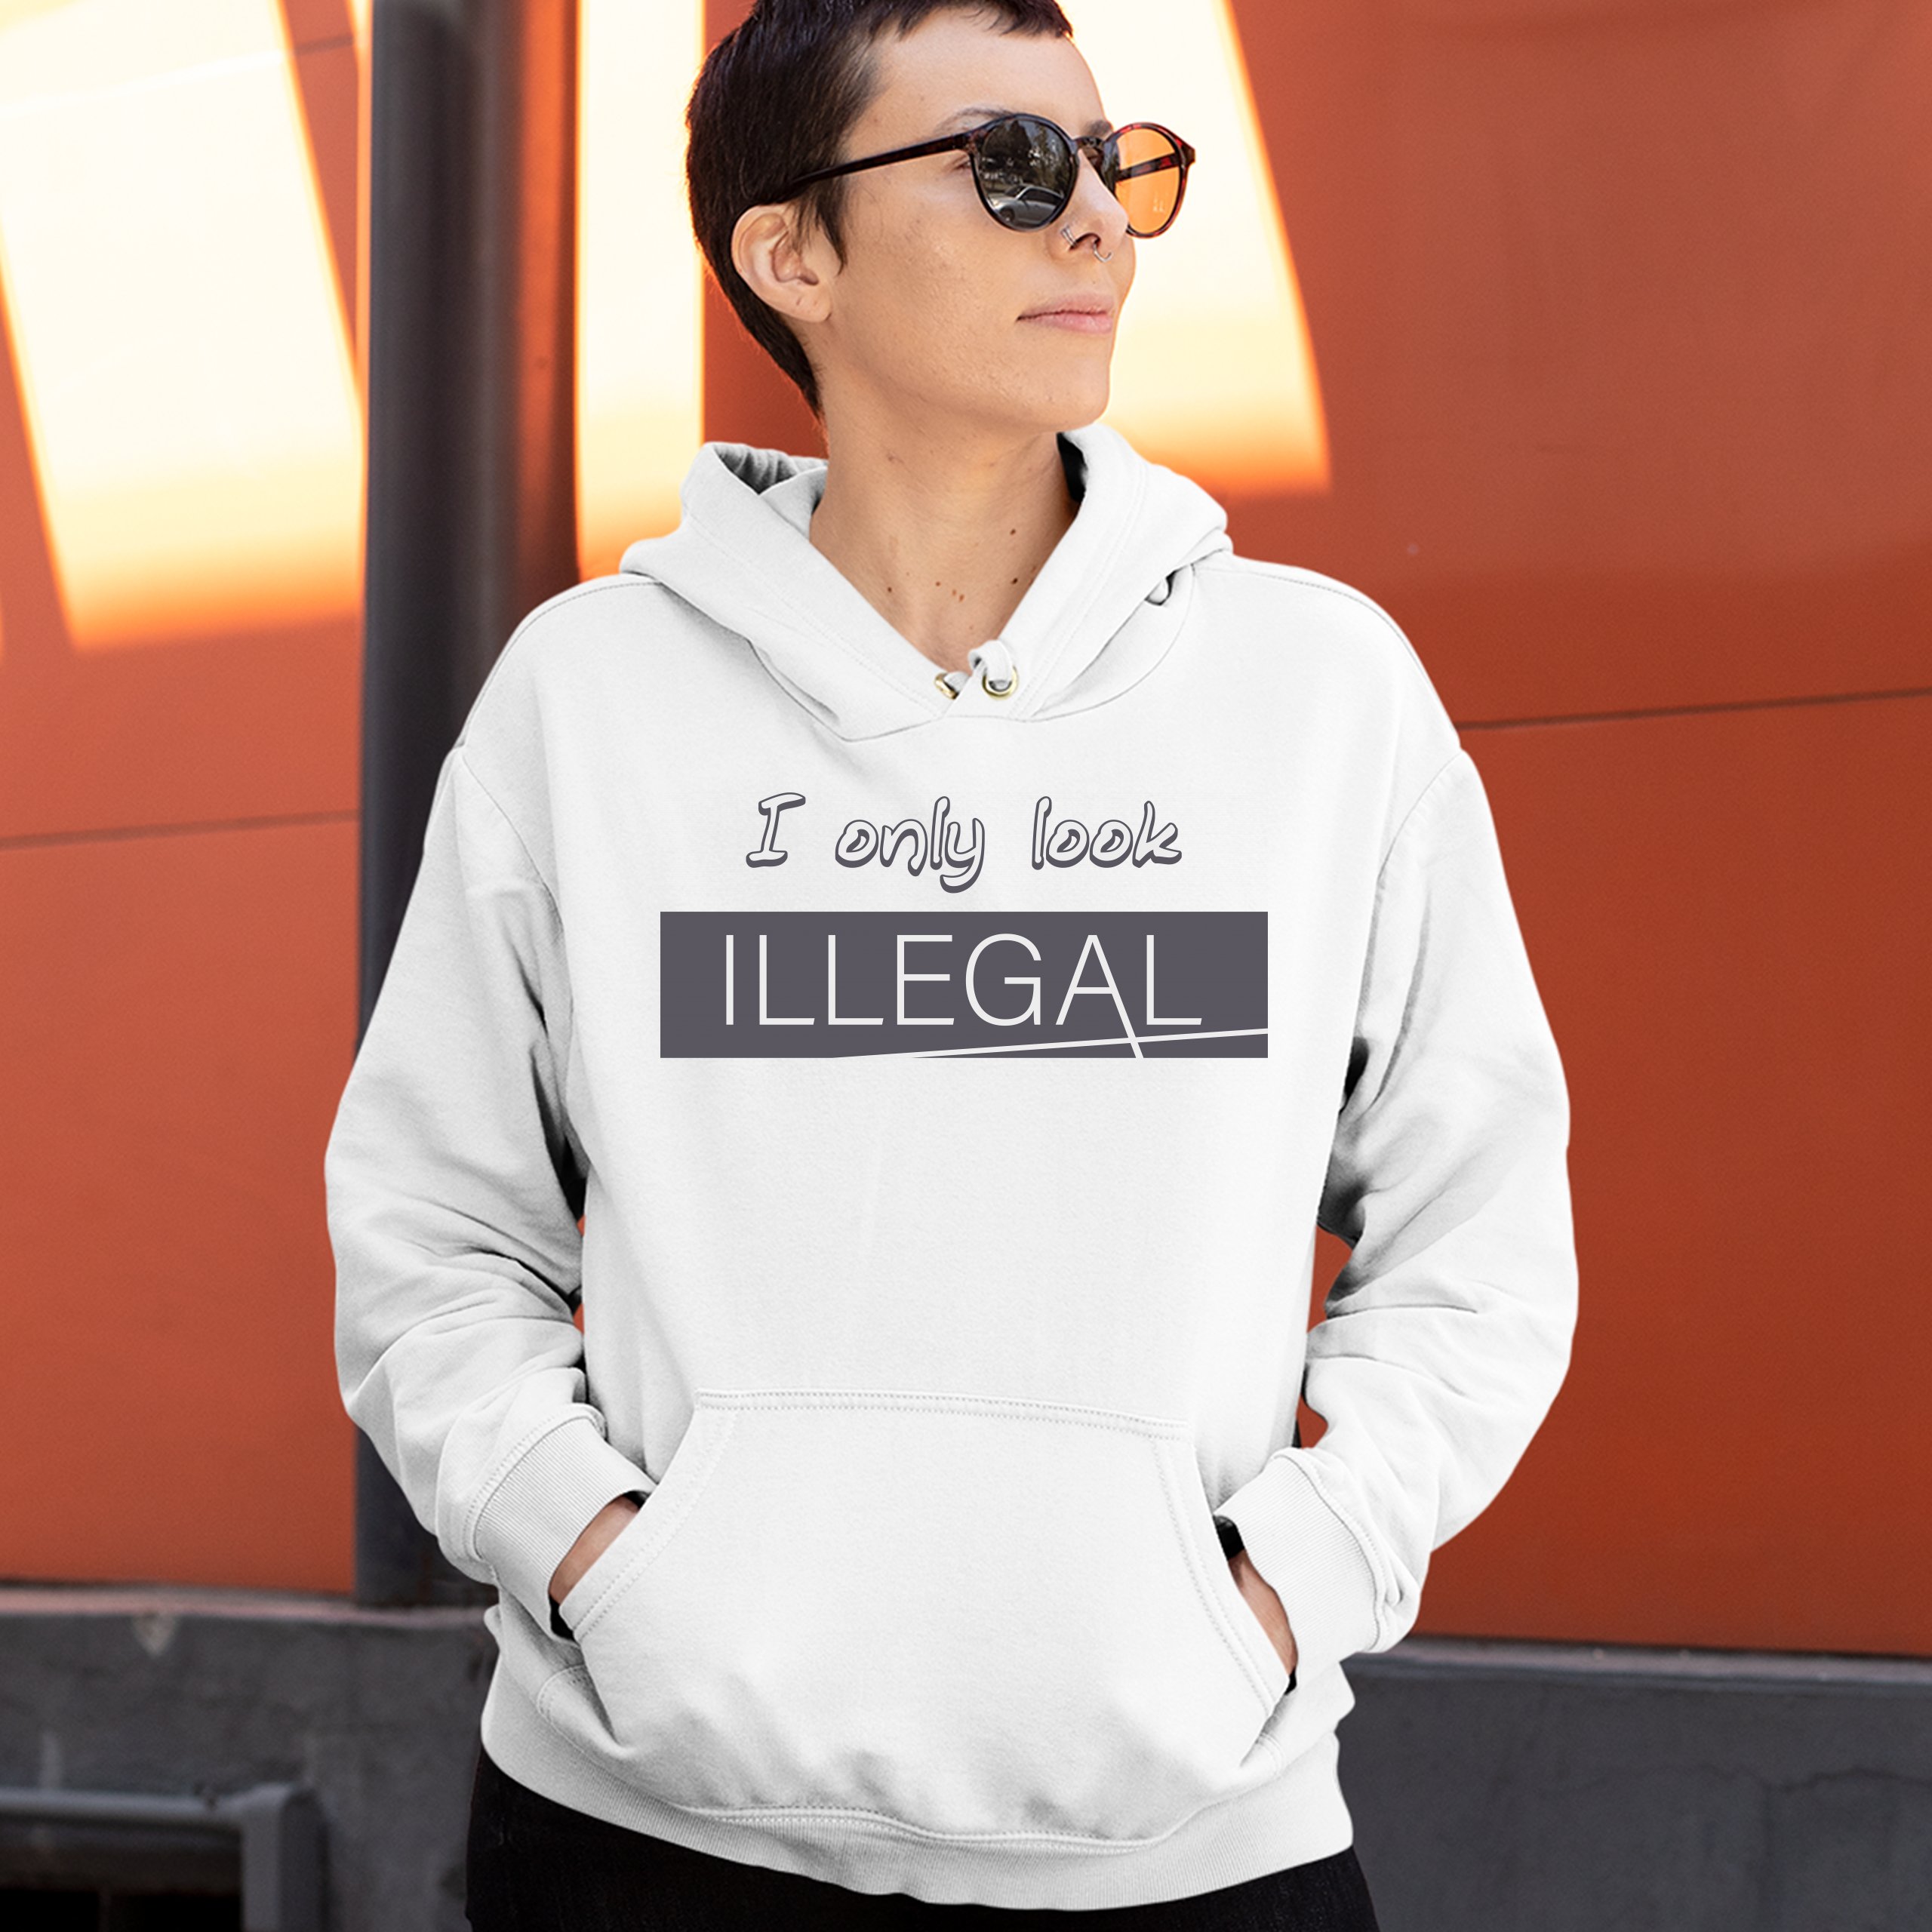 I Only Look Illegal Sweatshirt Stop Racism Pro Immigration Funny Hoodie